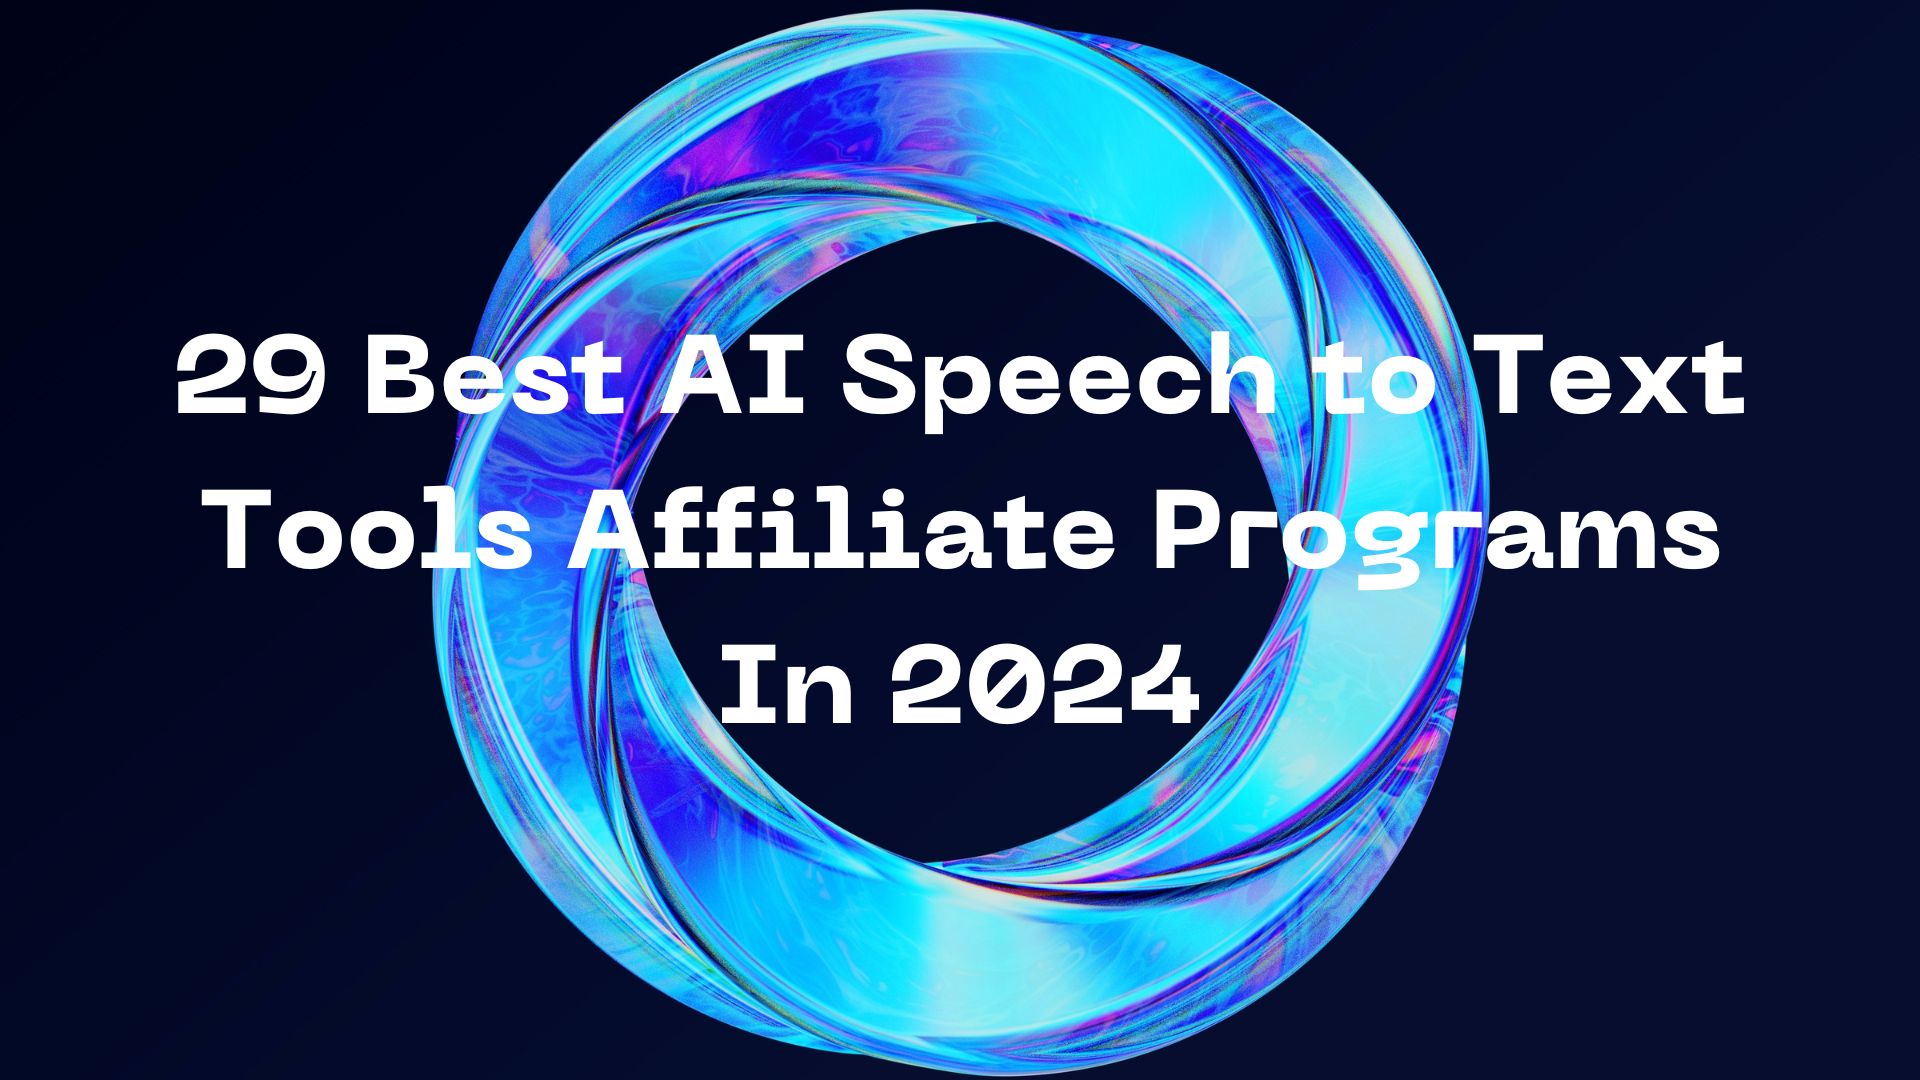 29 Best AI Speech to Text Tools Affiliate Programs In 2024